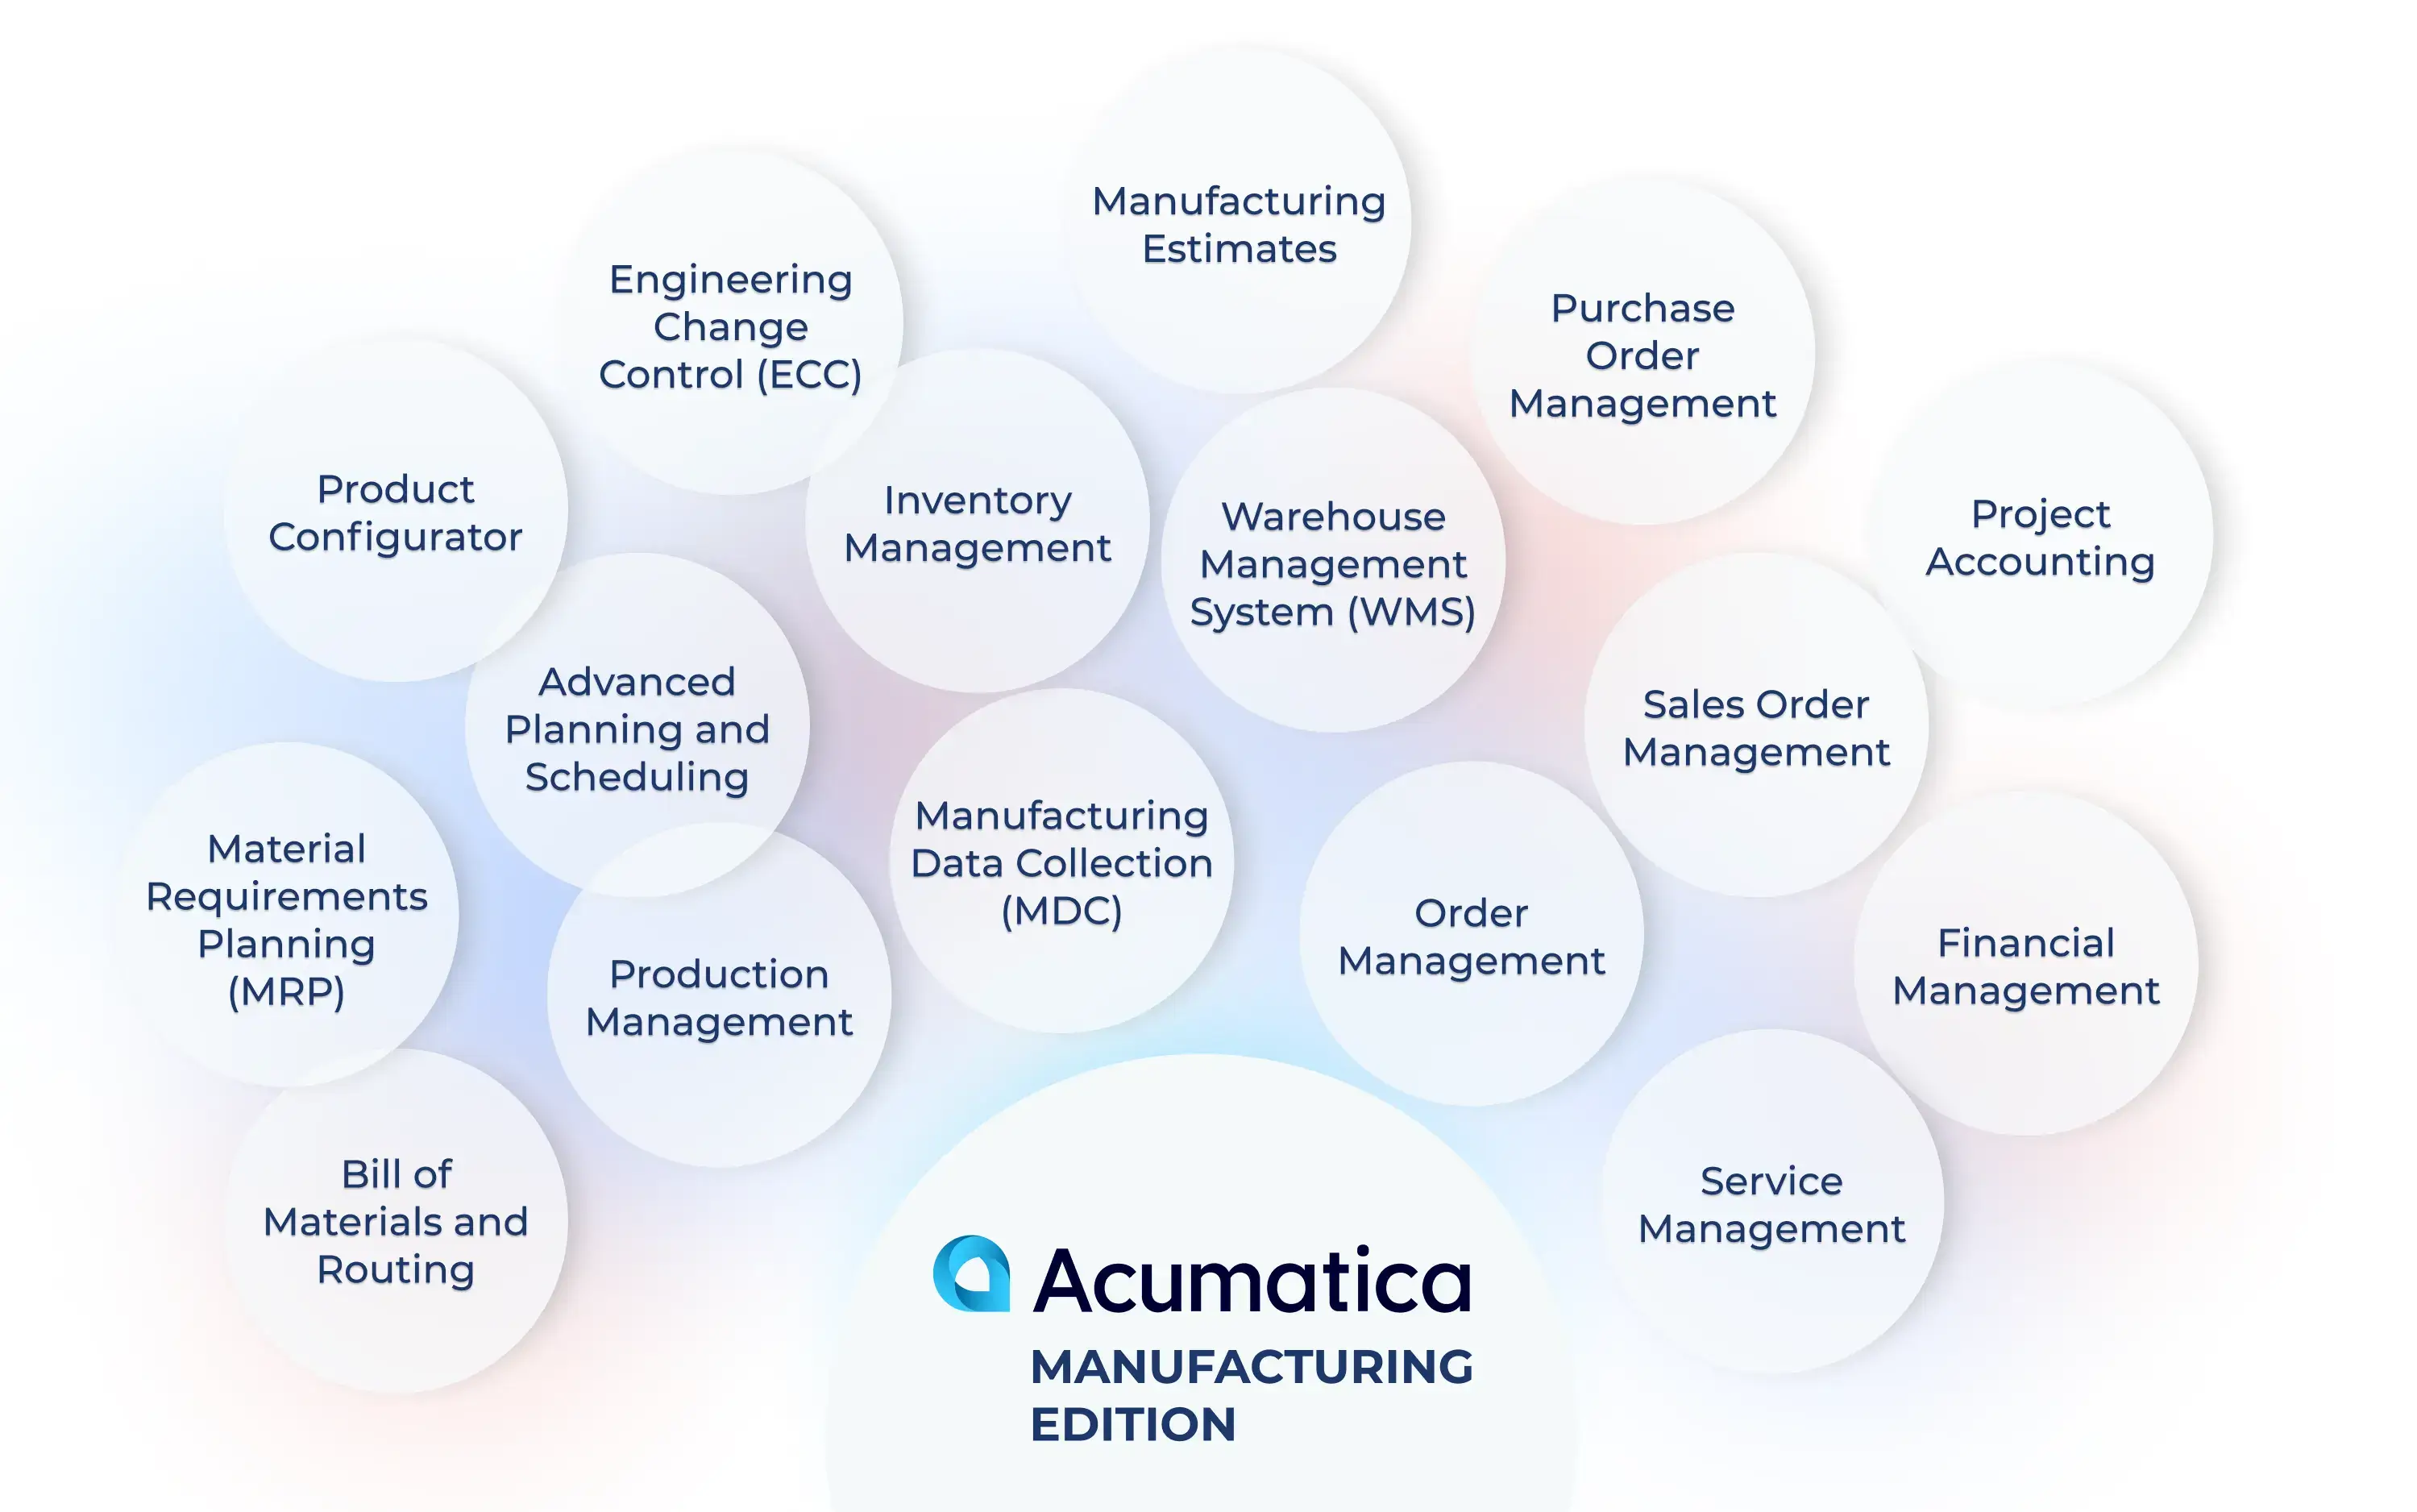 Acumatica Manufacturing edition features